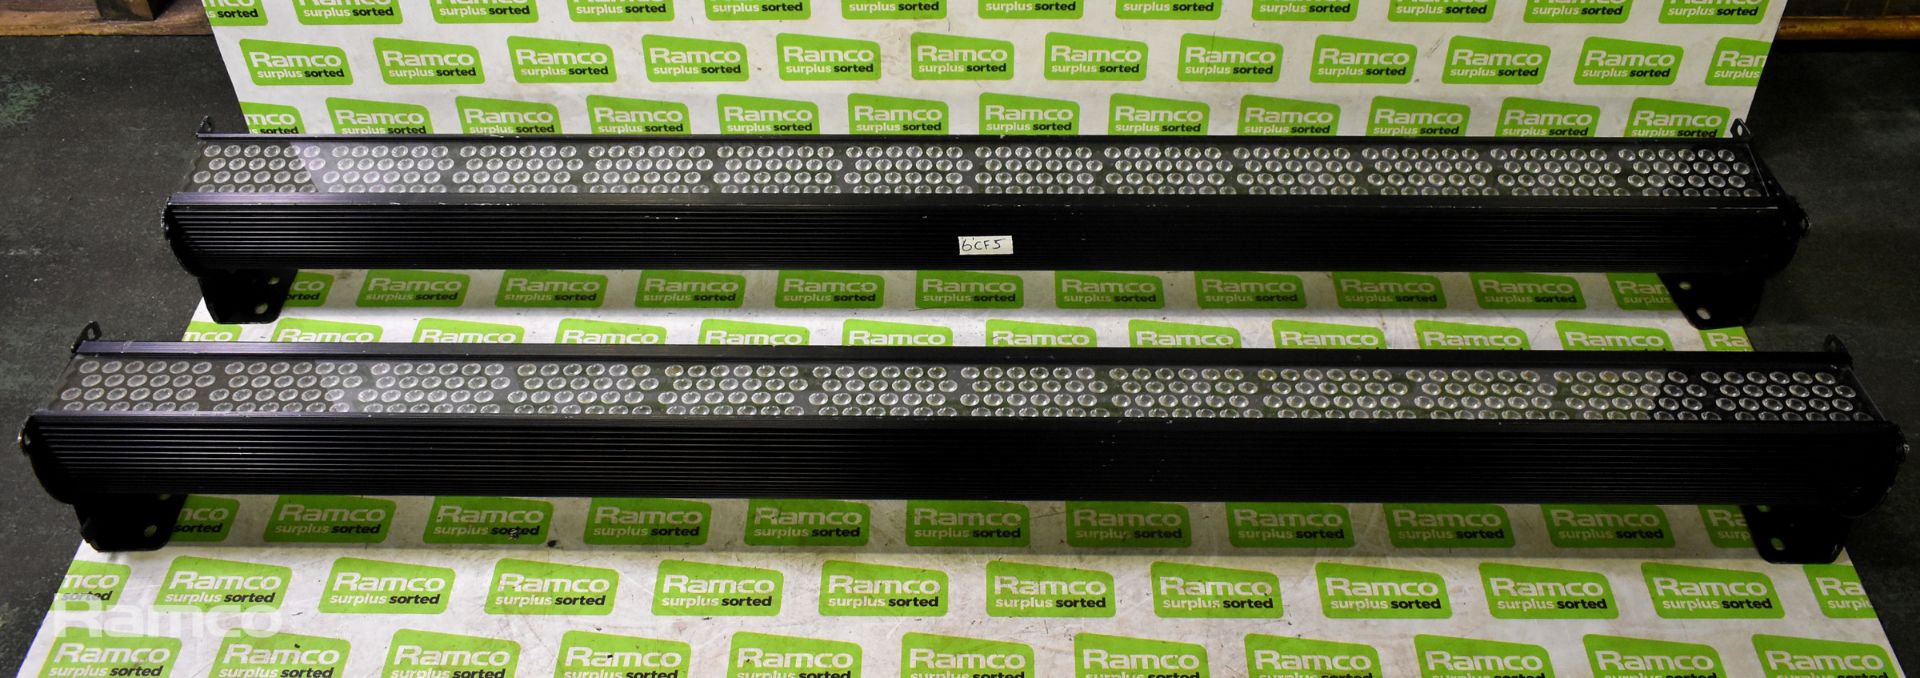 2x Chroma-Q Color Force 72 LED fixture lights with flight case - 1x MISSING CLIP ON FLIGHT CASE - Image 7 of 11